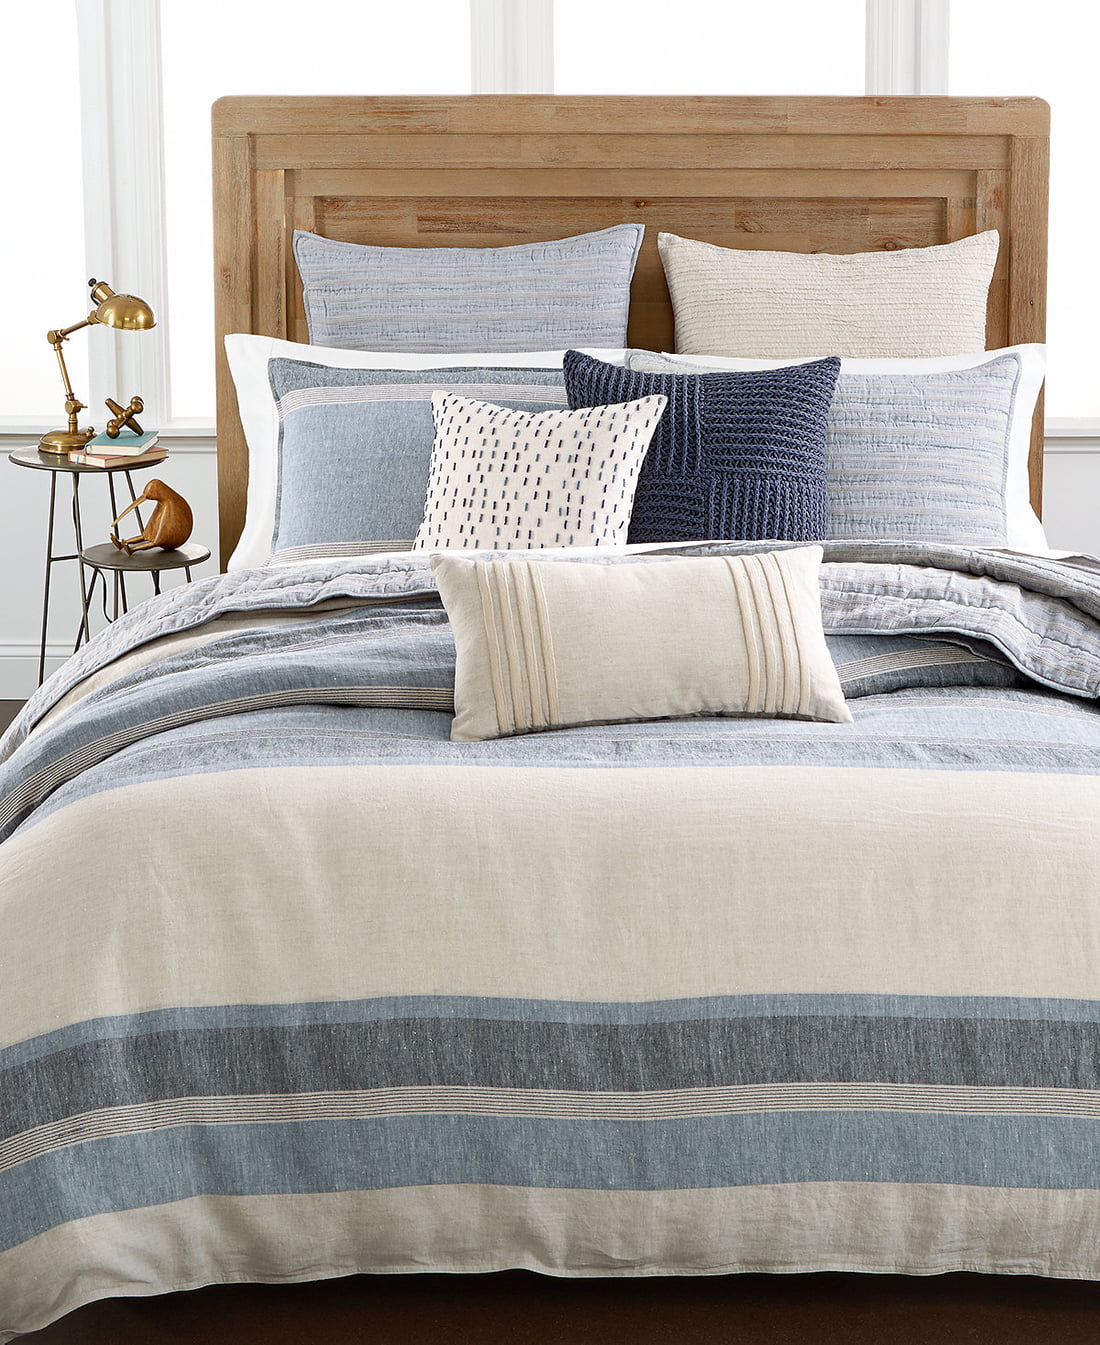 Hotel Collection Linen Stripe Full, Hotel Collection Woven Texture Full Queen Duvet Cover